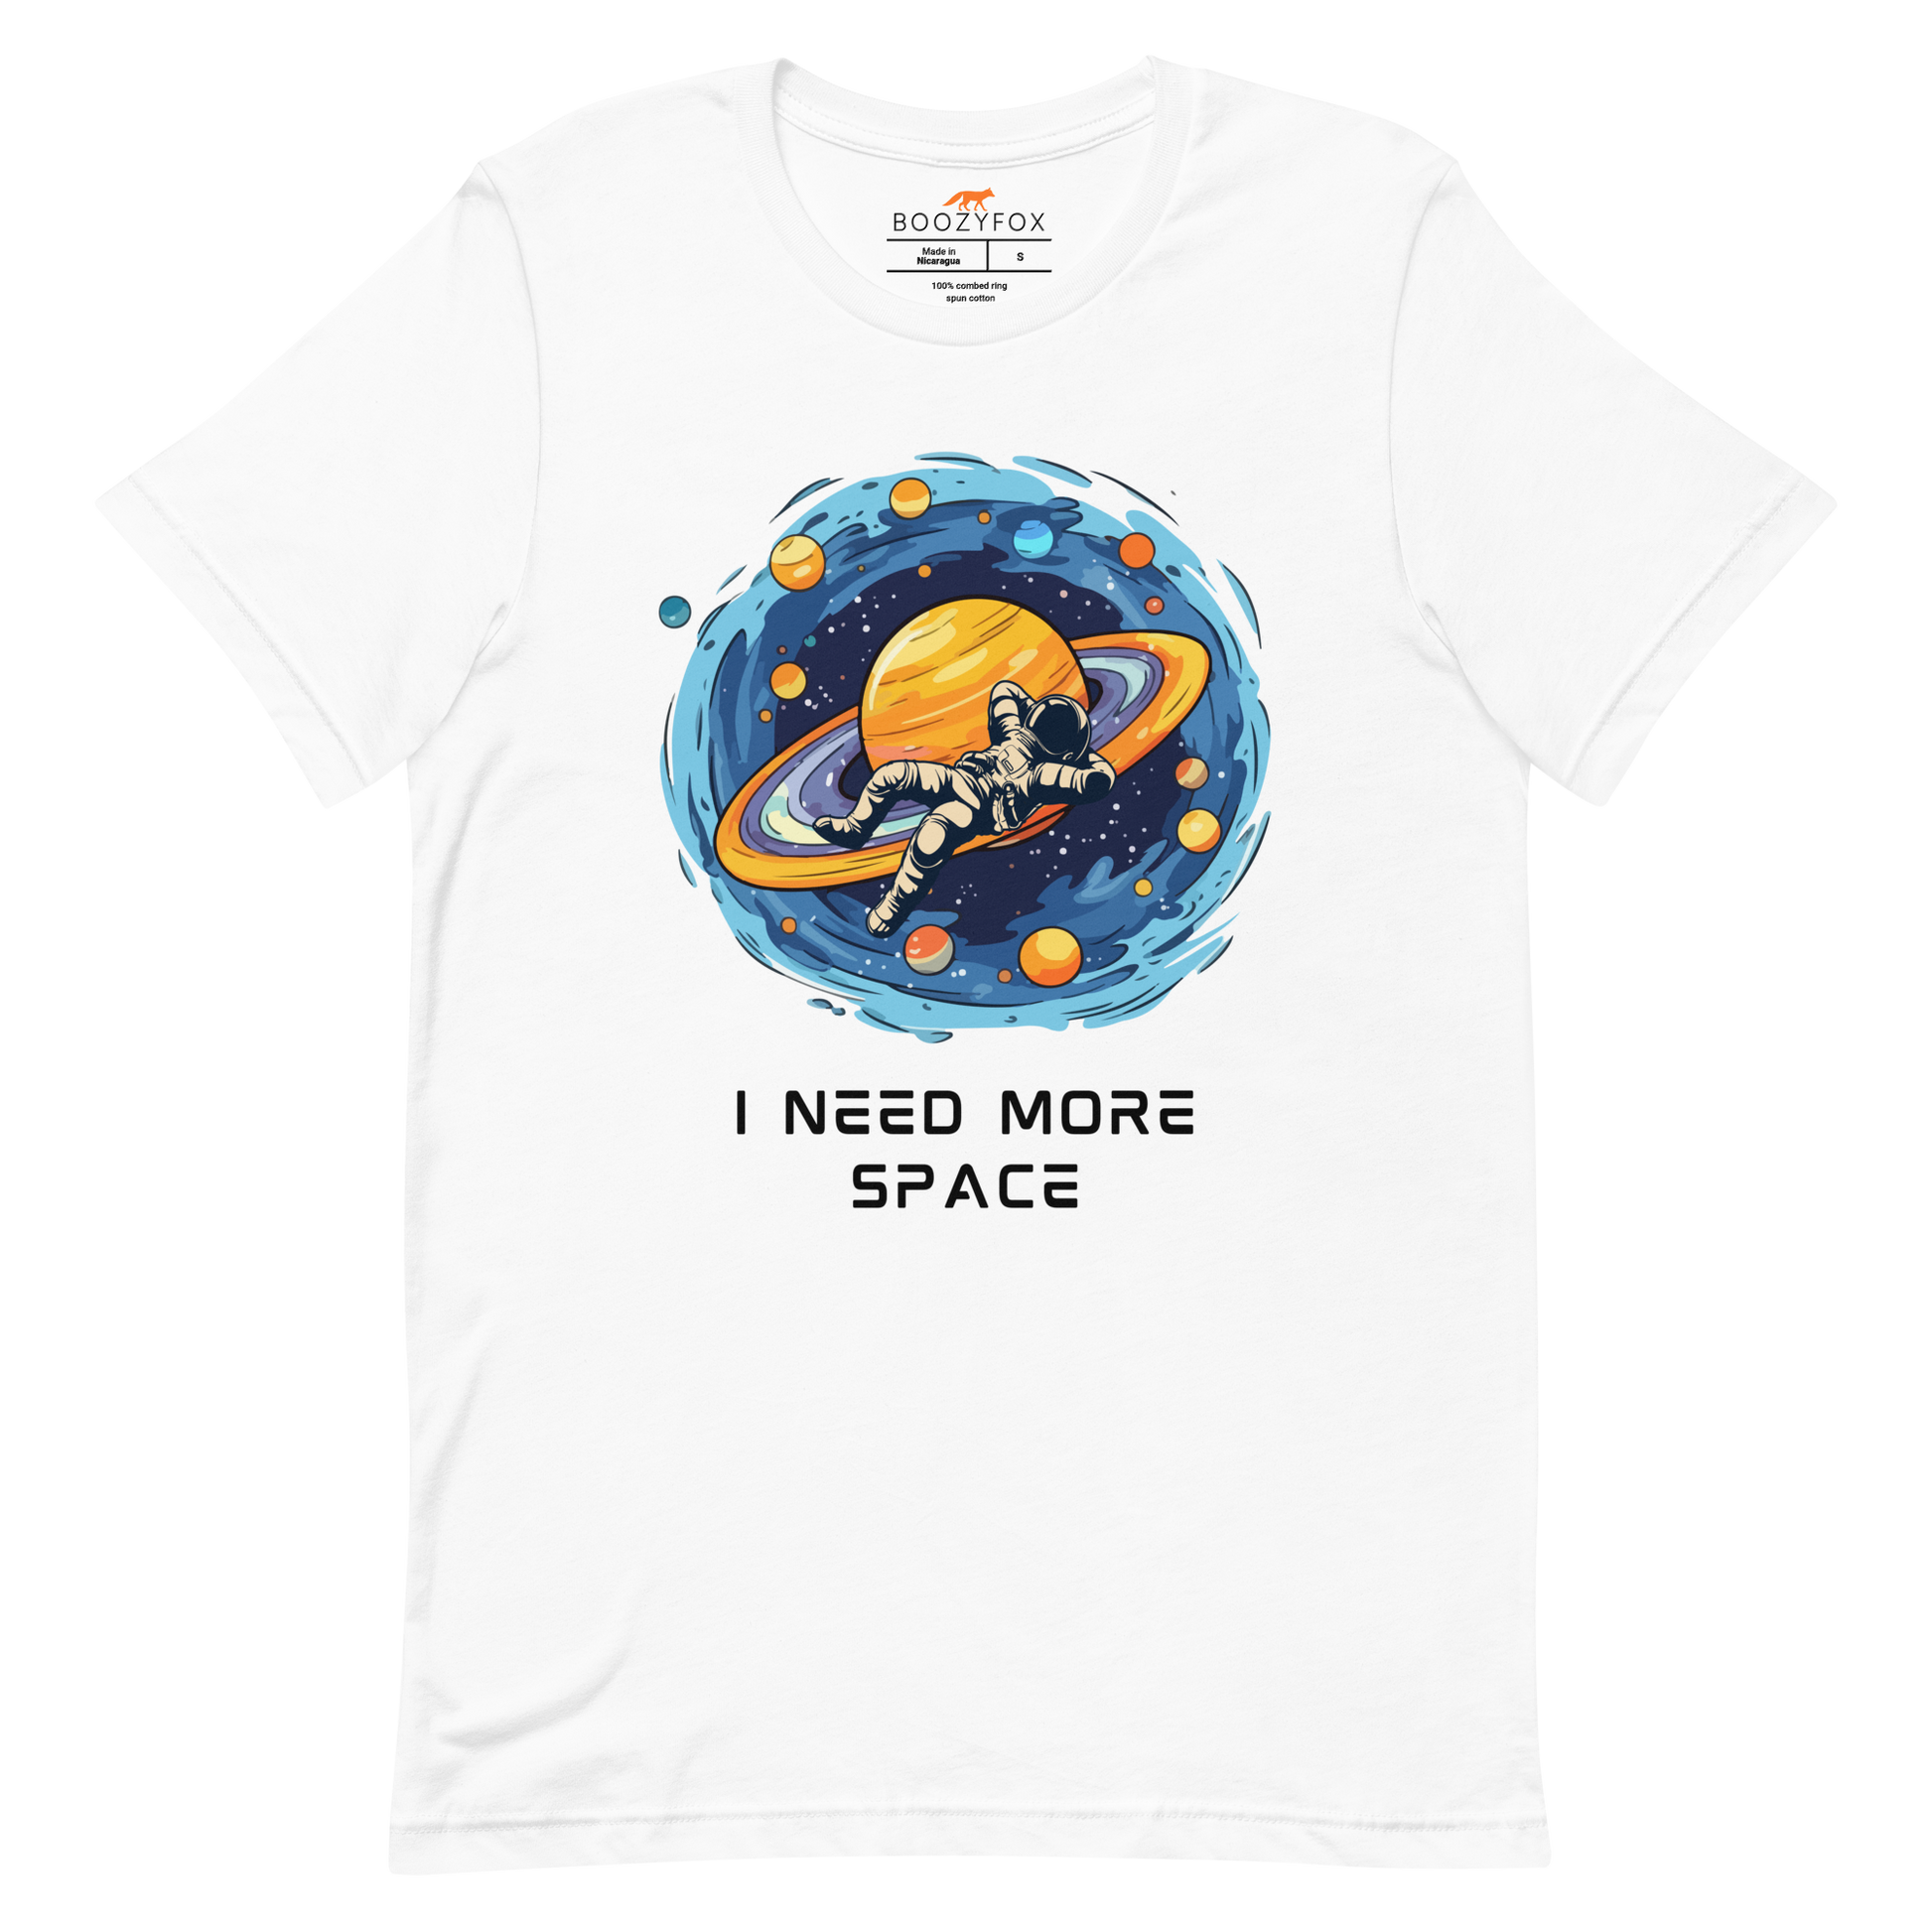 White Premium Astronaut Tee featuring a captivating I Need More Space graphic on the chest - Funny Graphic Space Tees - Boozy Fox